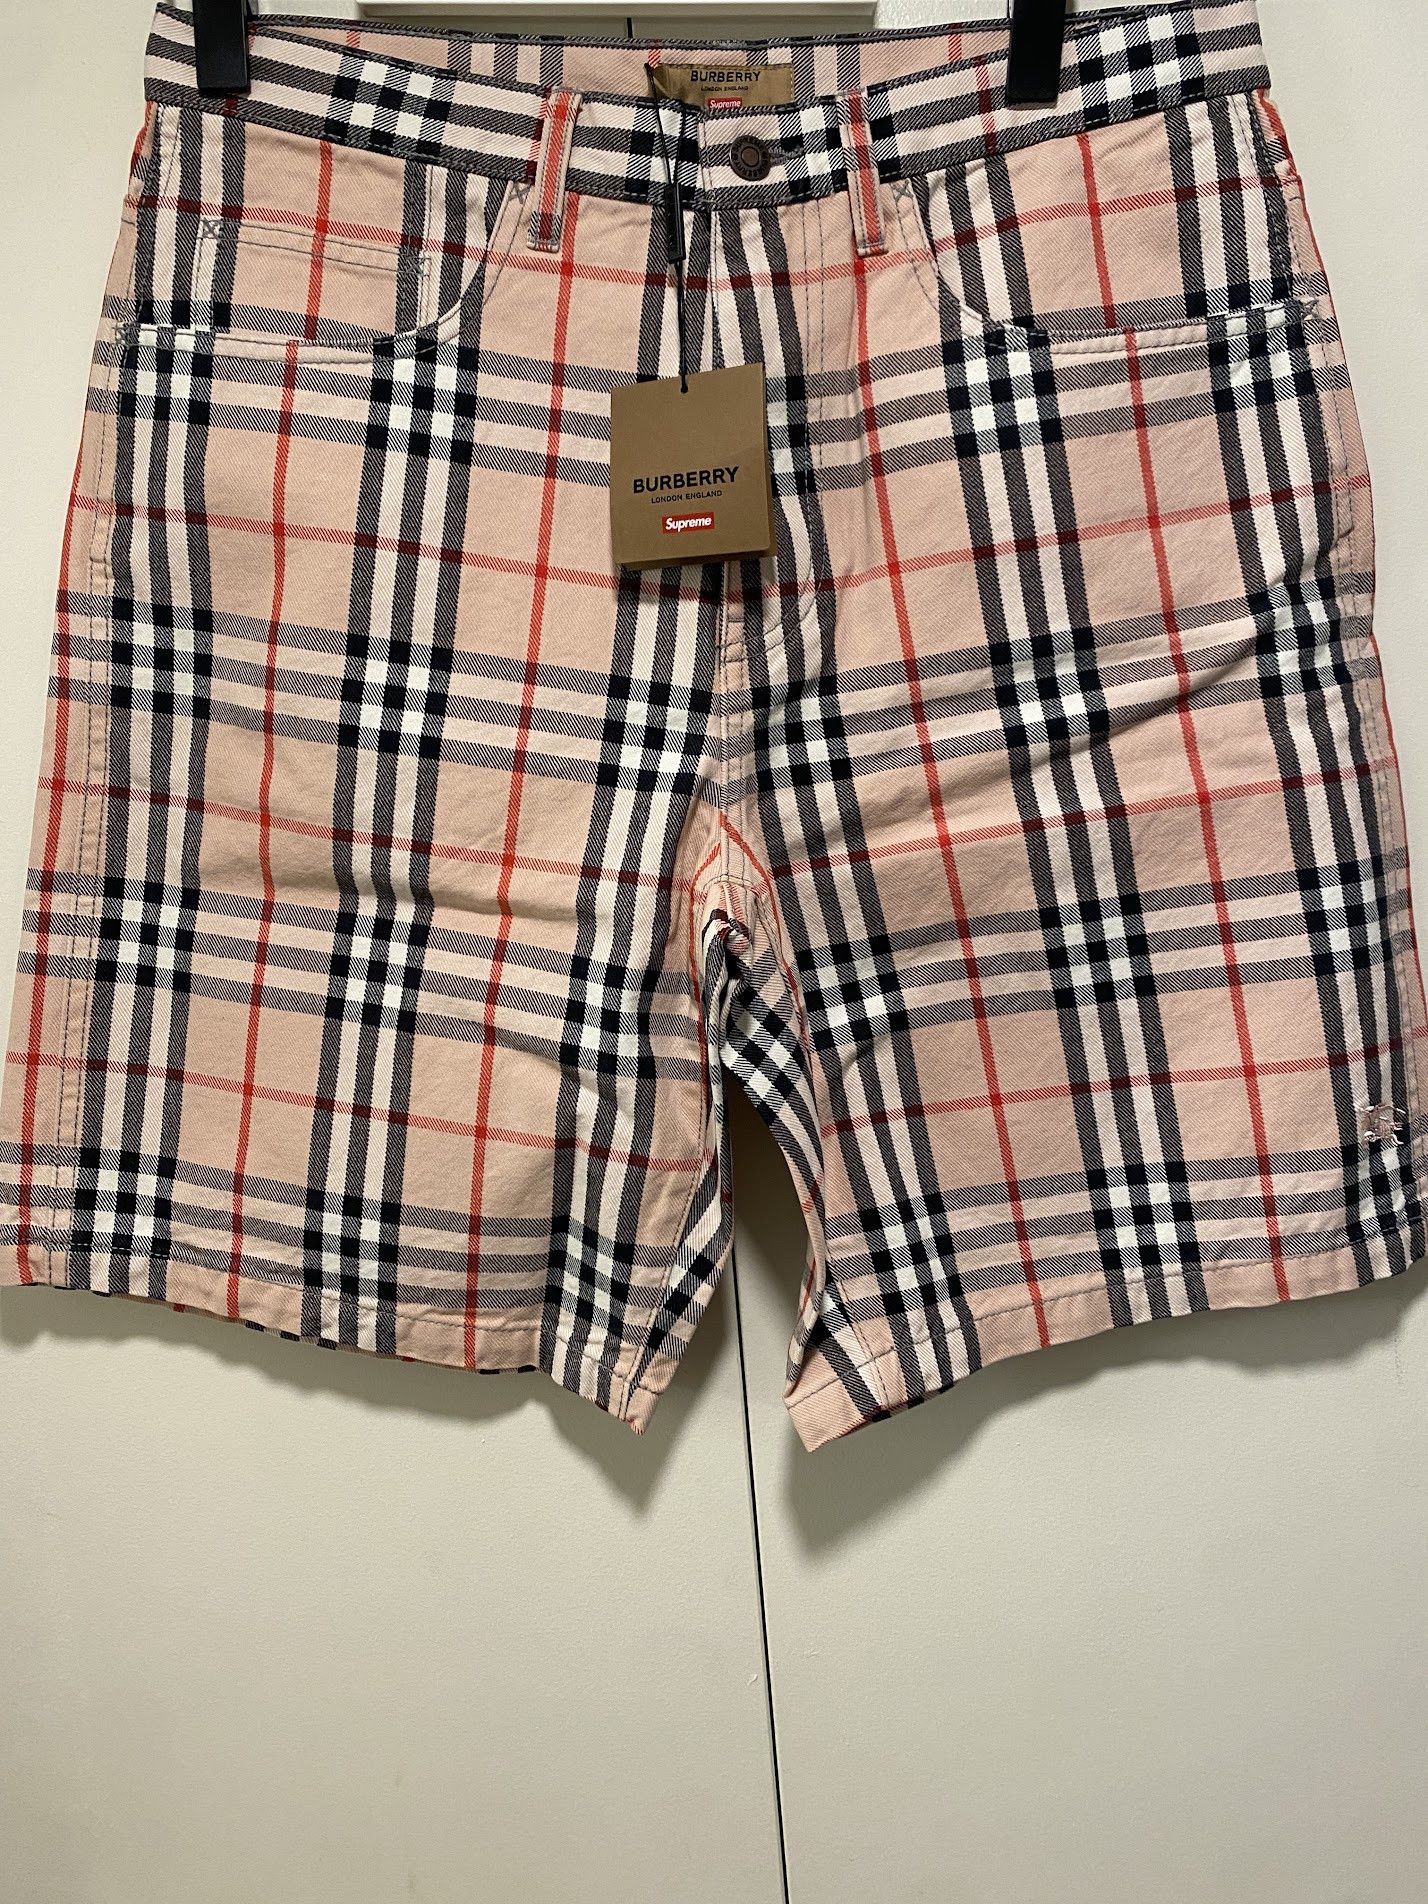 Supreme Burberry x Supreme S/S 22 Shorts Jeans - Pink Size 32